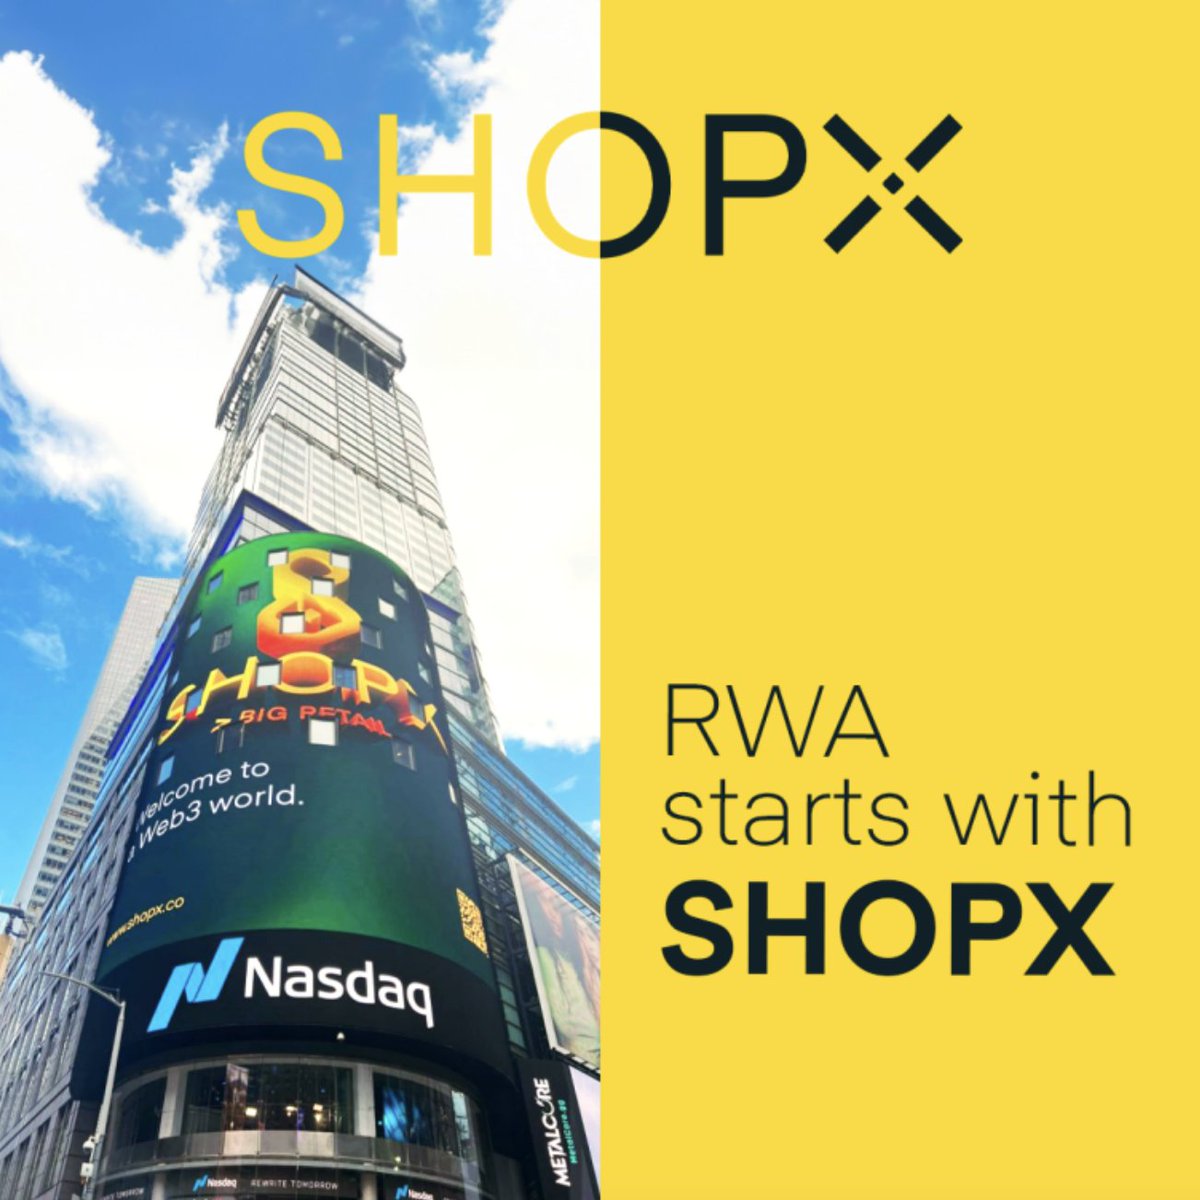 ❎ Plunge into #RWASeason with $SHOPX ❎ 

$SHOPX isn't just surviving, they're thriving. 

Withstanding two bear markets, they're now poised to dominate the #RWA space. 

Get ready for groundbreaking developments! #Web3 #RWA #Crypto